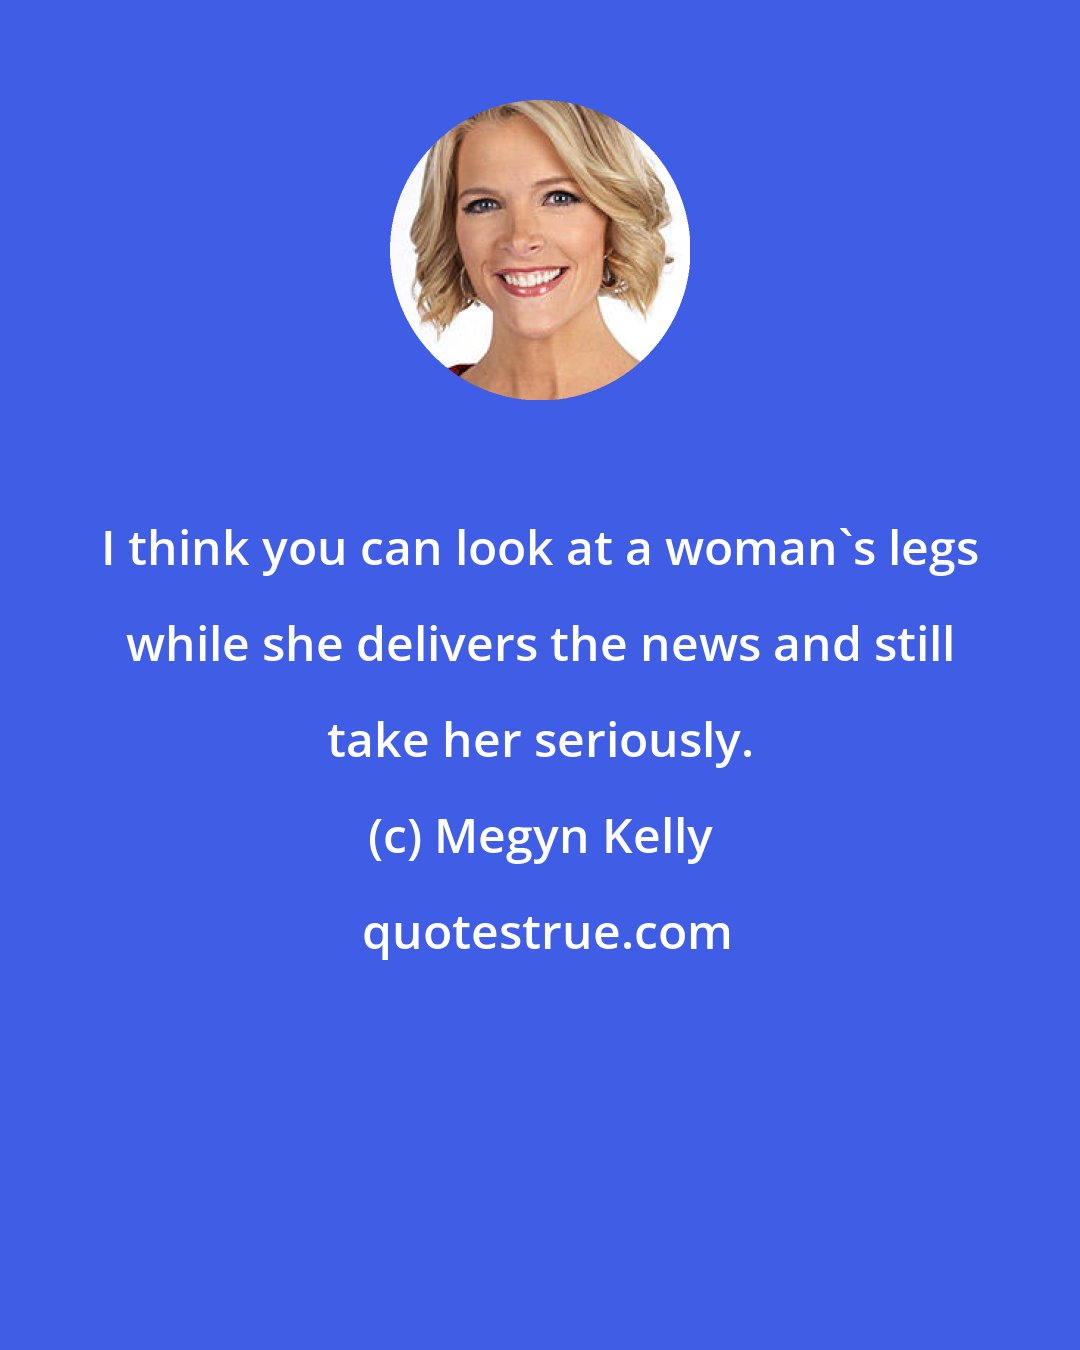 Megyn Kelly: I think you can look at a woman's legs while she delivers the news and still take her seriously.